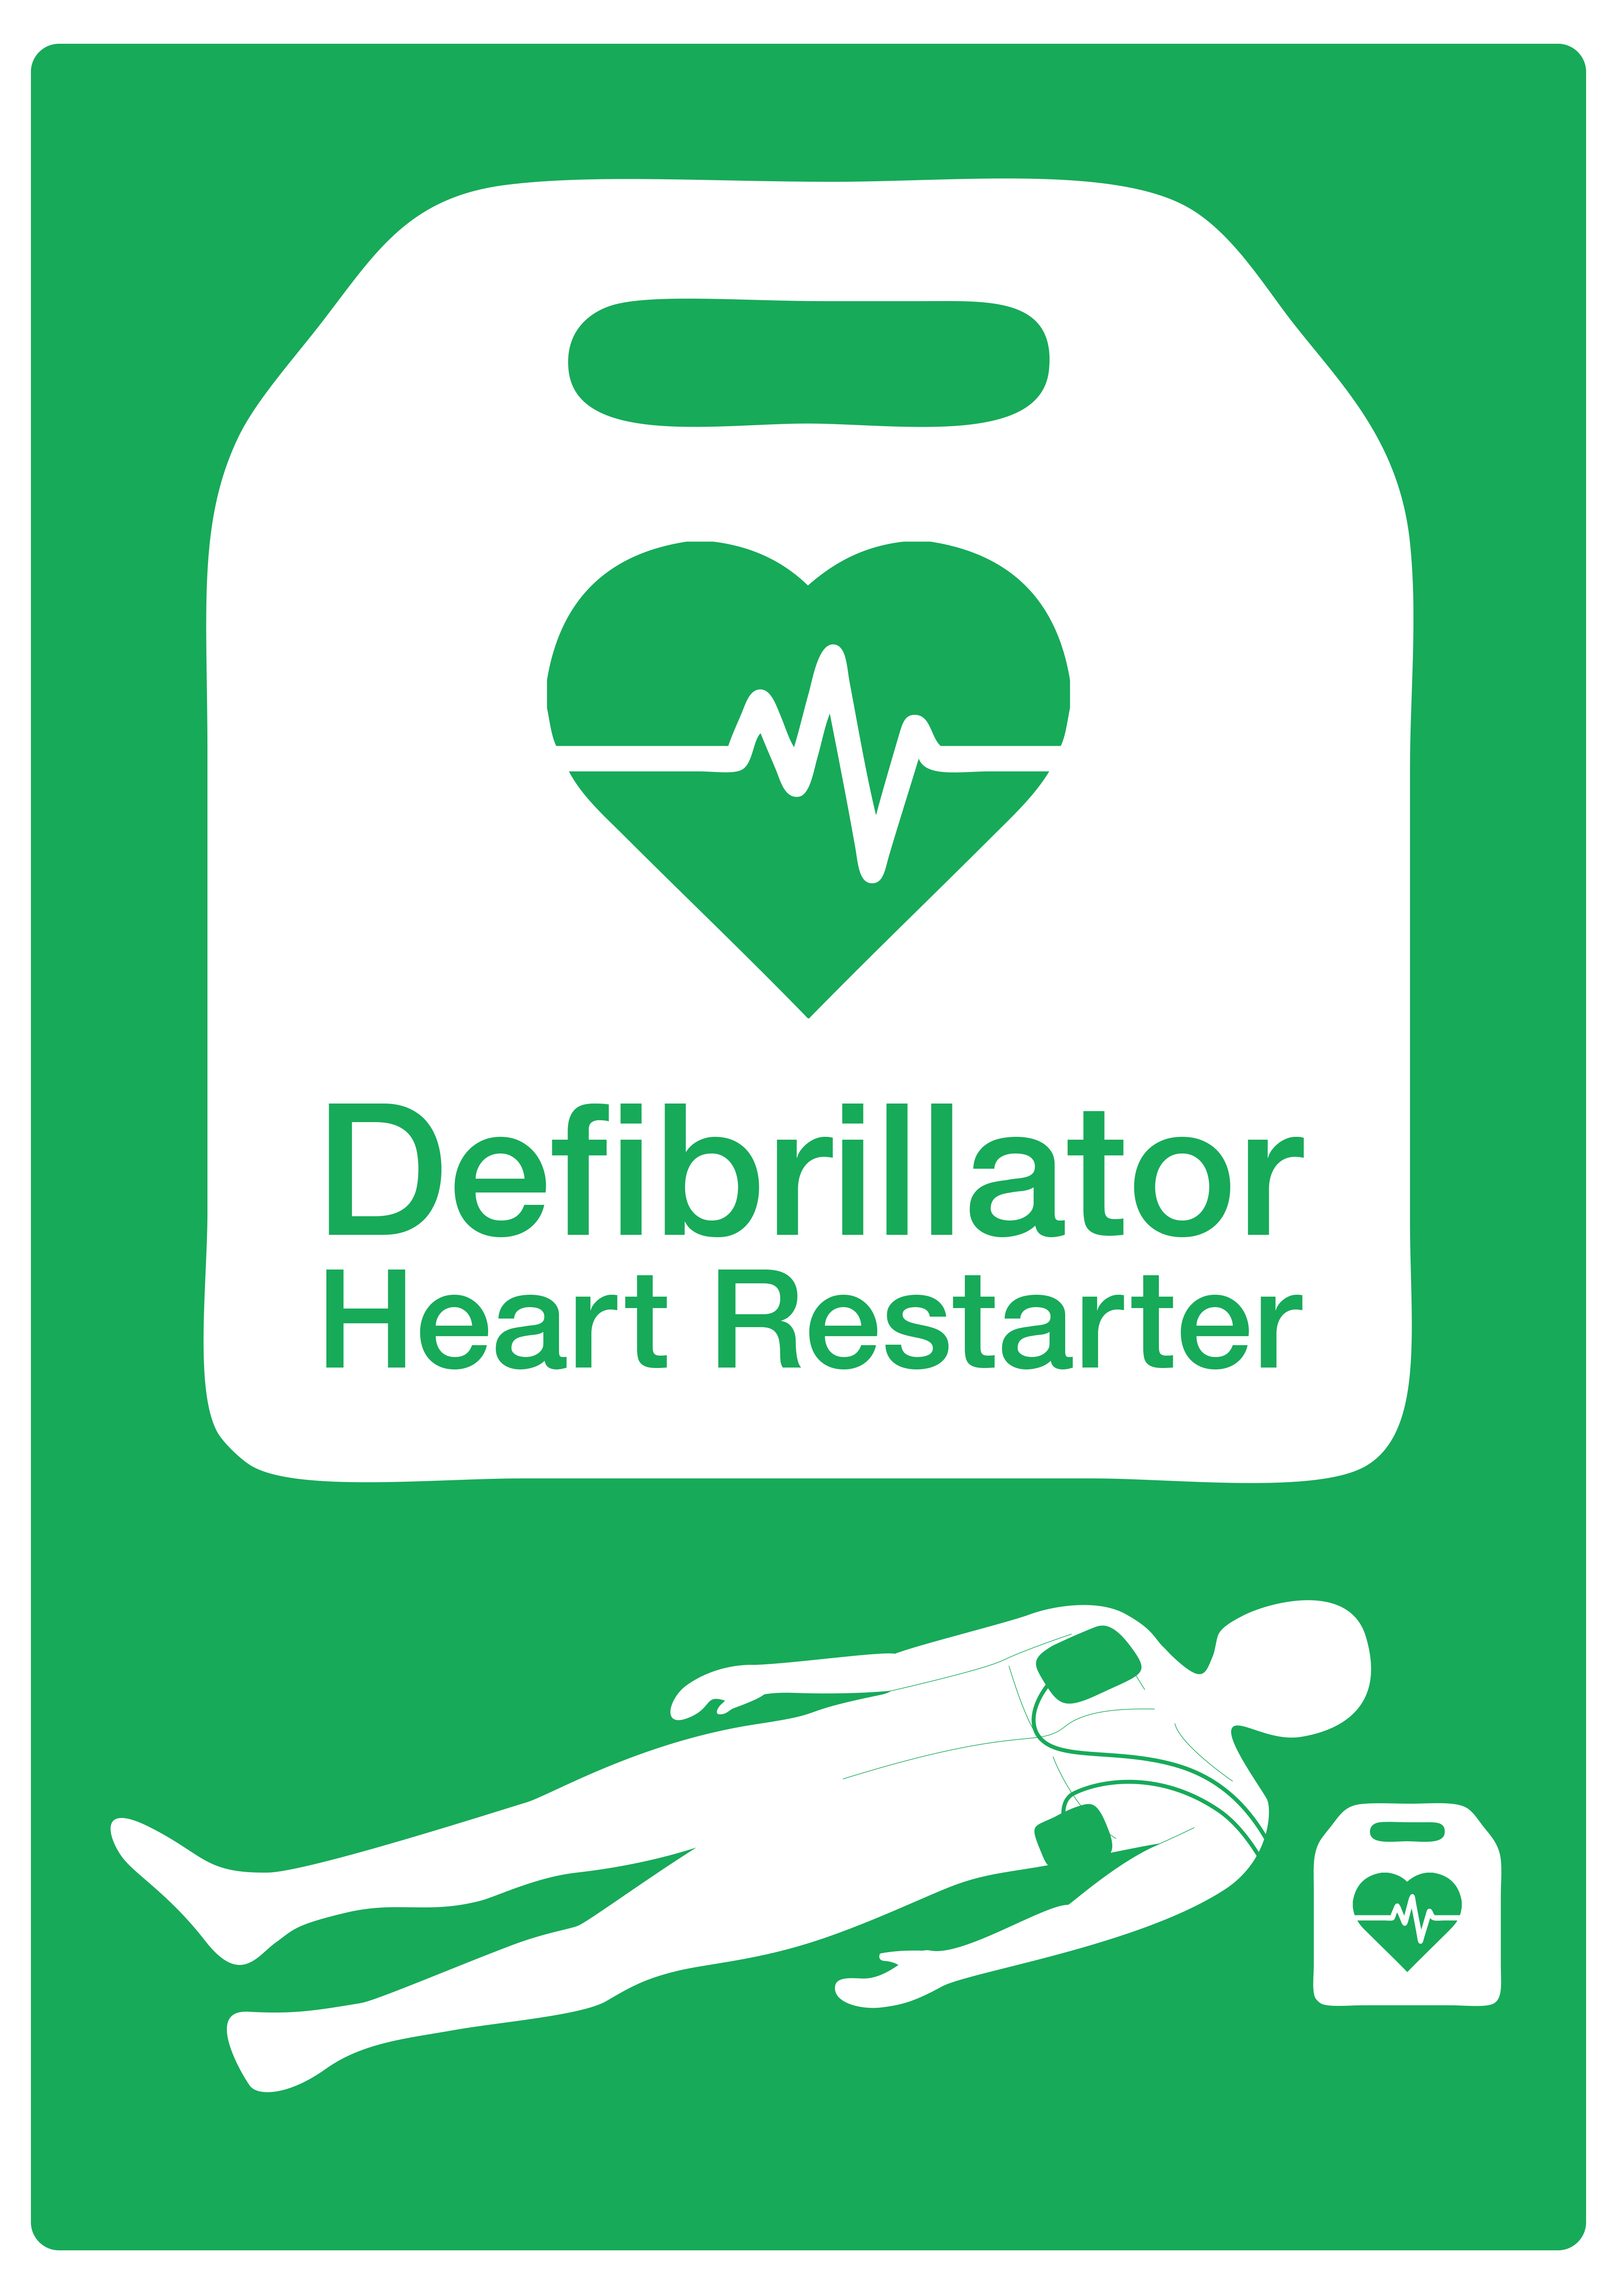 guidance-standard-sign-for-aeds-resuscitation-council-uk